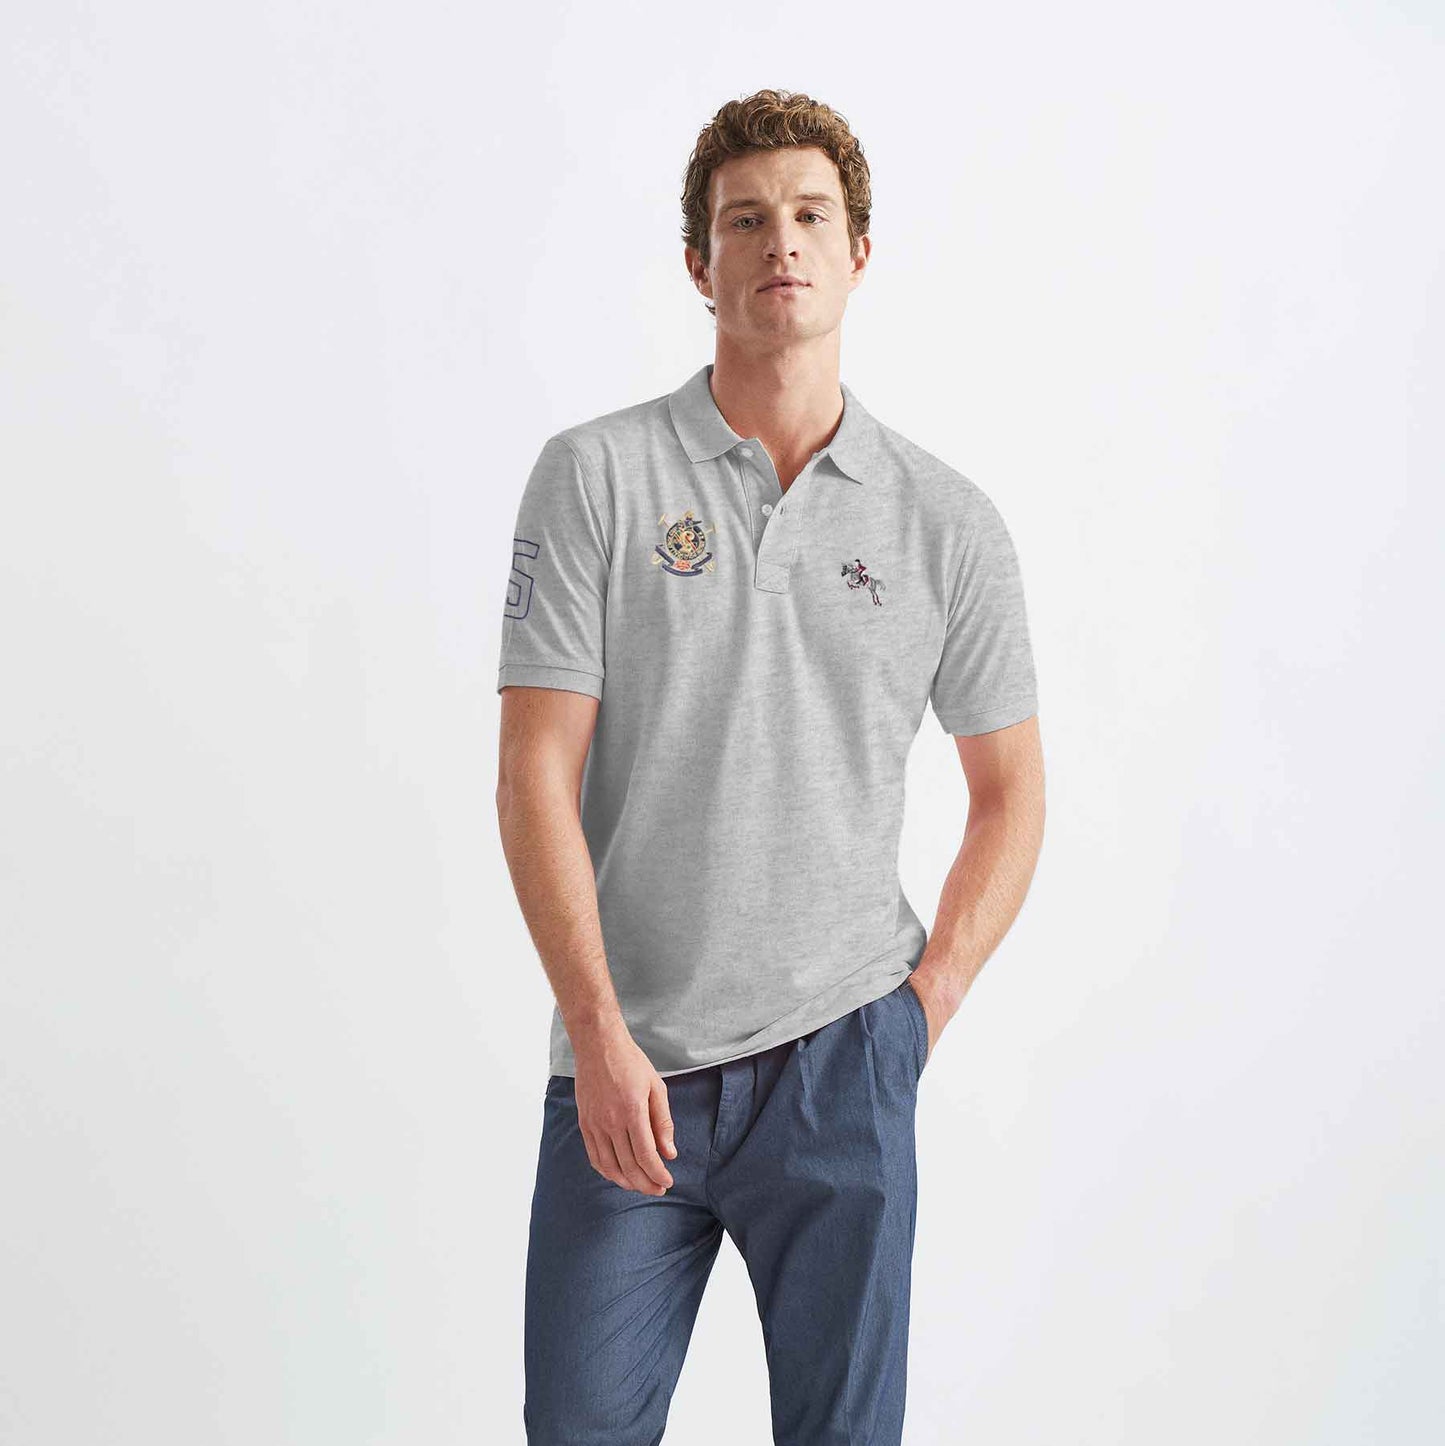 Polo Republica Men's Pony Crest & 5 Embroidered Short Sleeve Polo Shirt